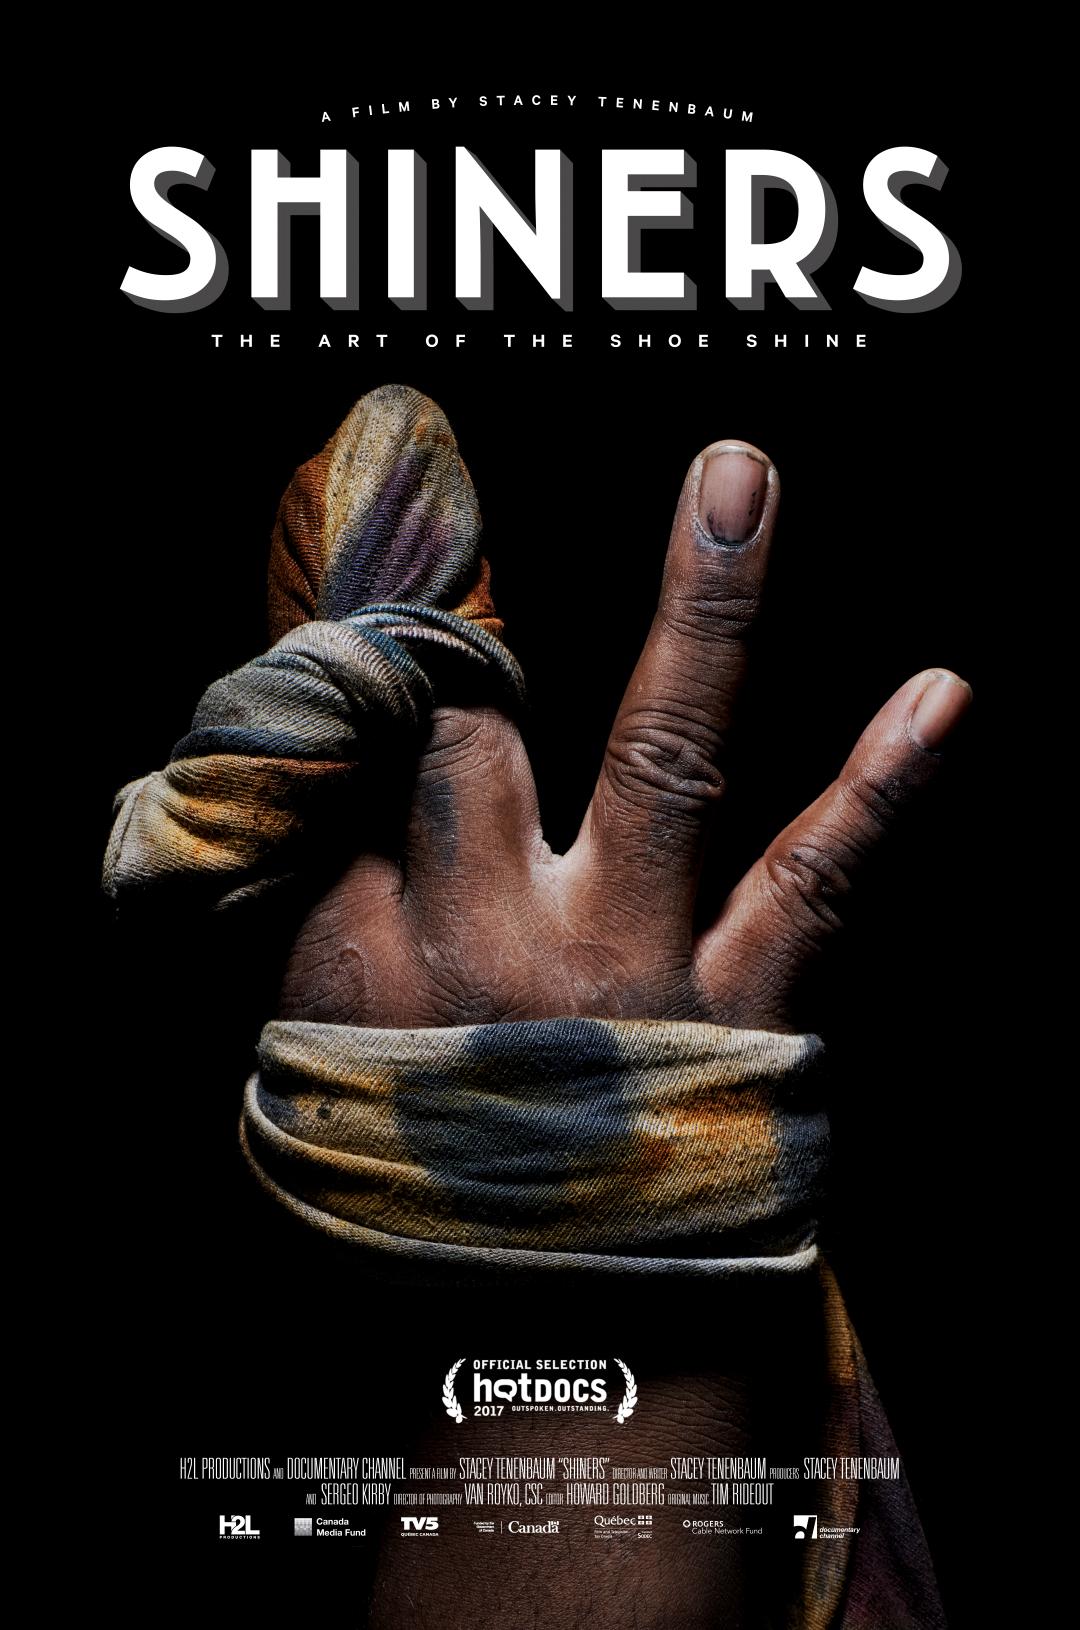 Shiners (2017) starring N/A on DVD on DVD